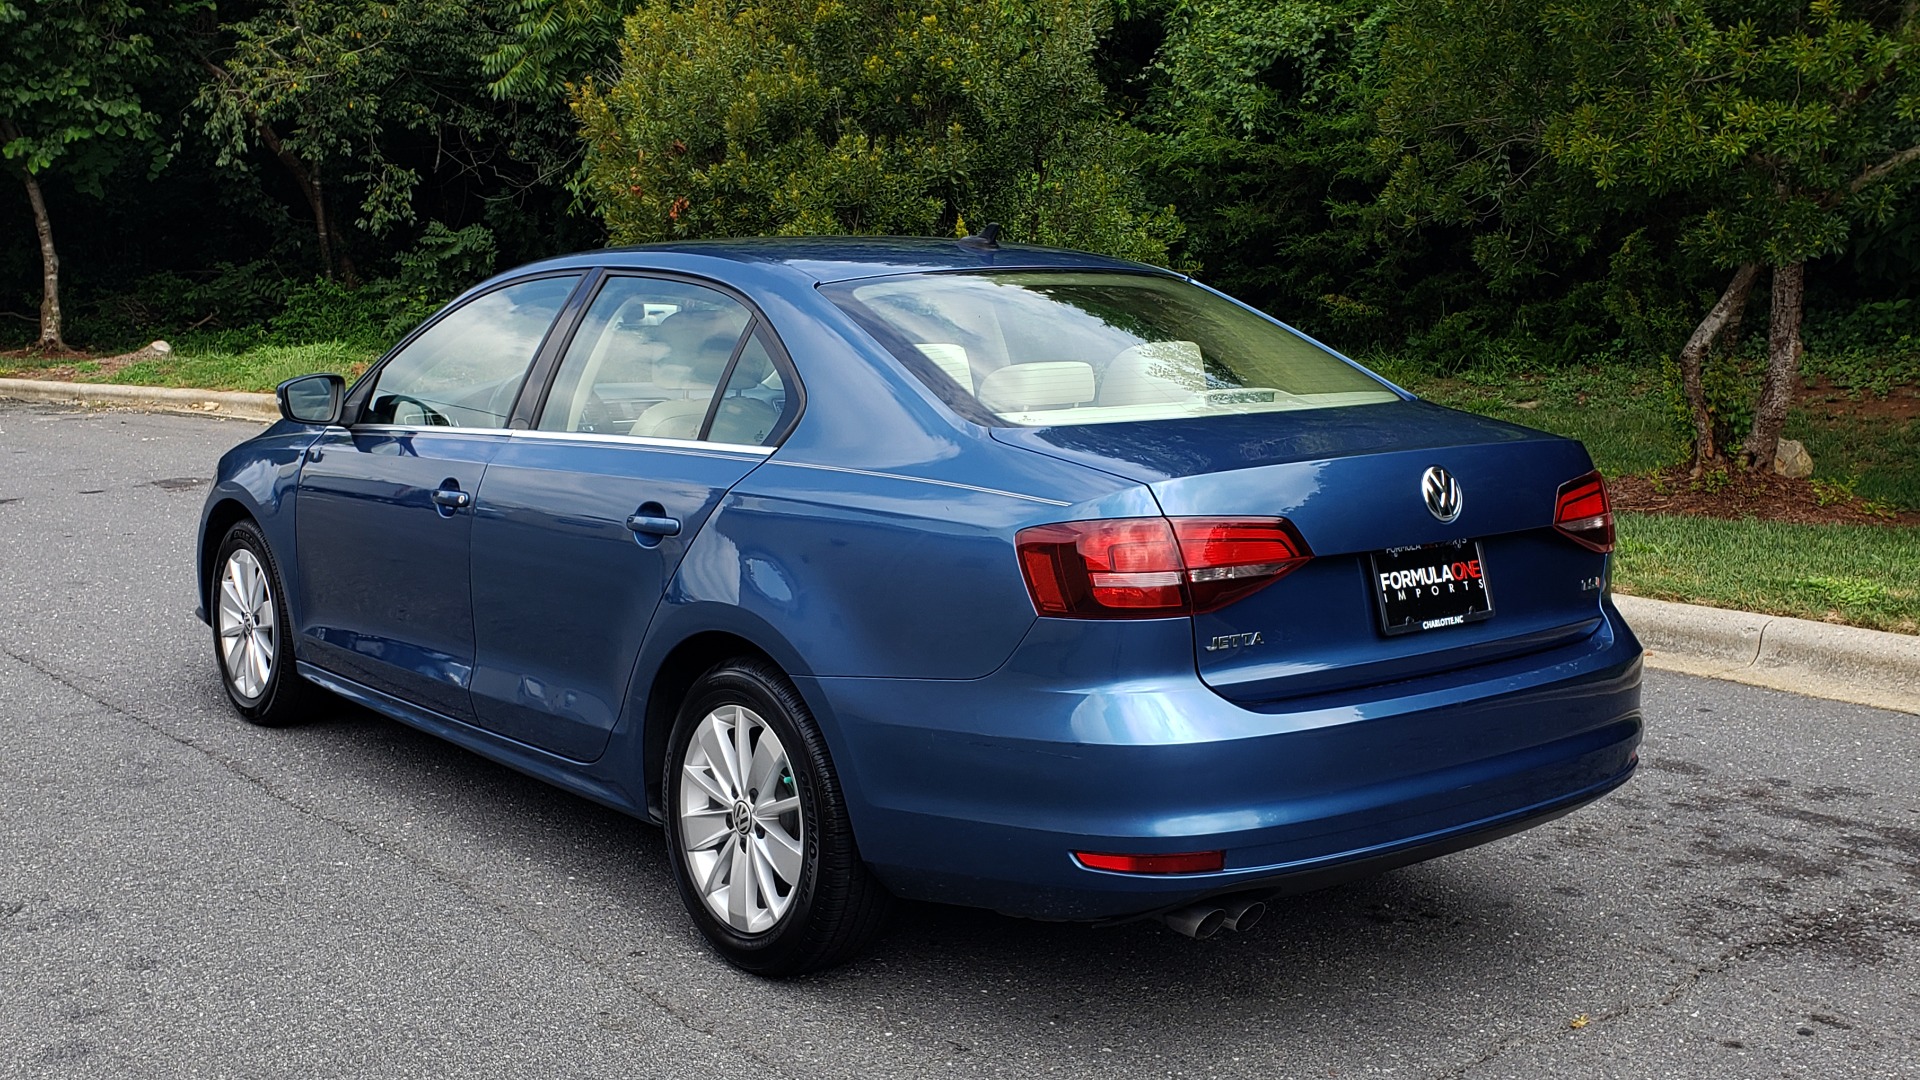 Used 2016 Volkswagen JETTA SEDAN 1.4T SE W/ CONNECTIVITY / 6-SPD AUTO / HTD STS / SUNROOF / REARVIEW for sale Sold at Formula Imports in Charlotte NC 28227 3